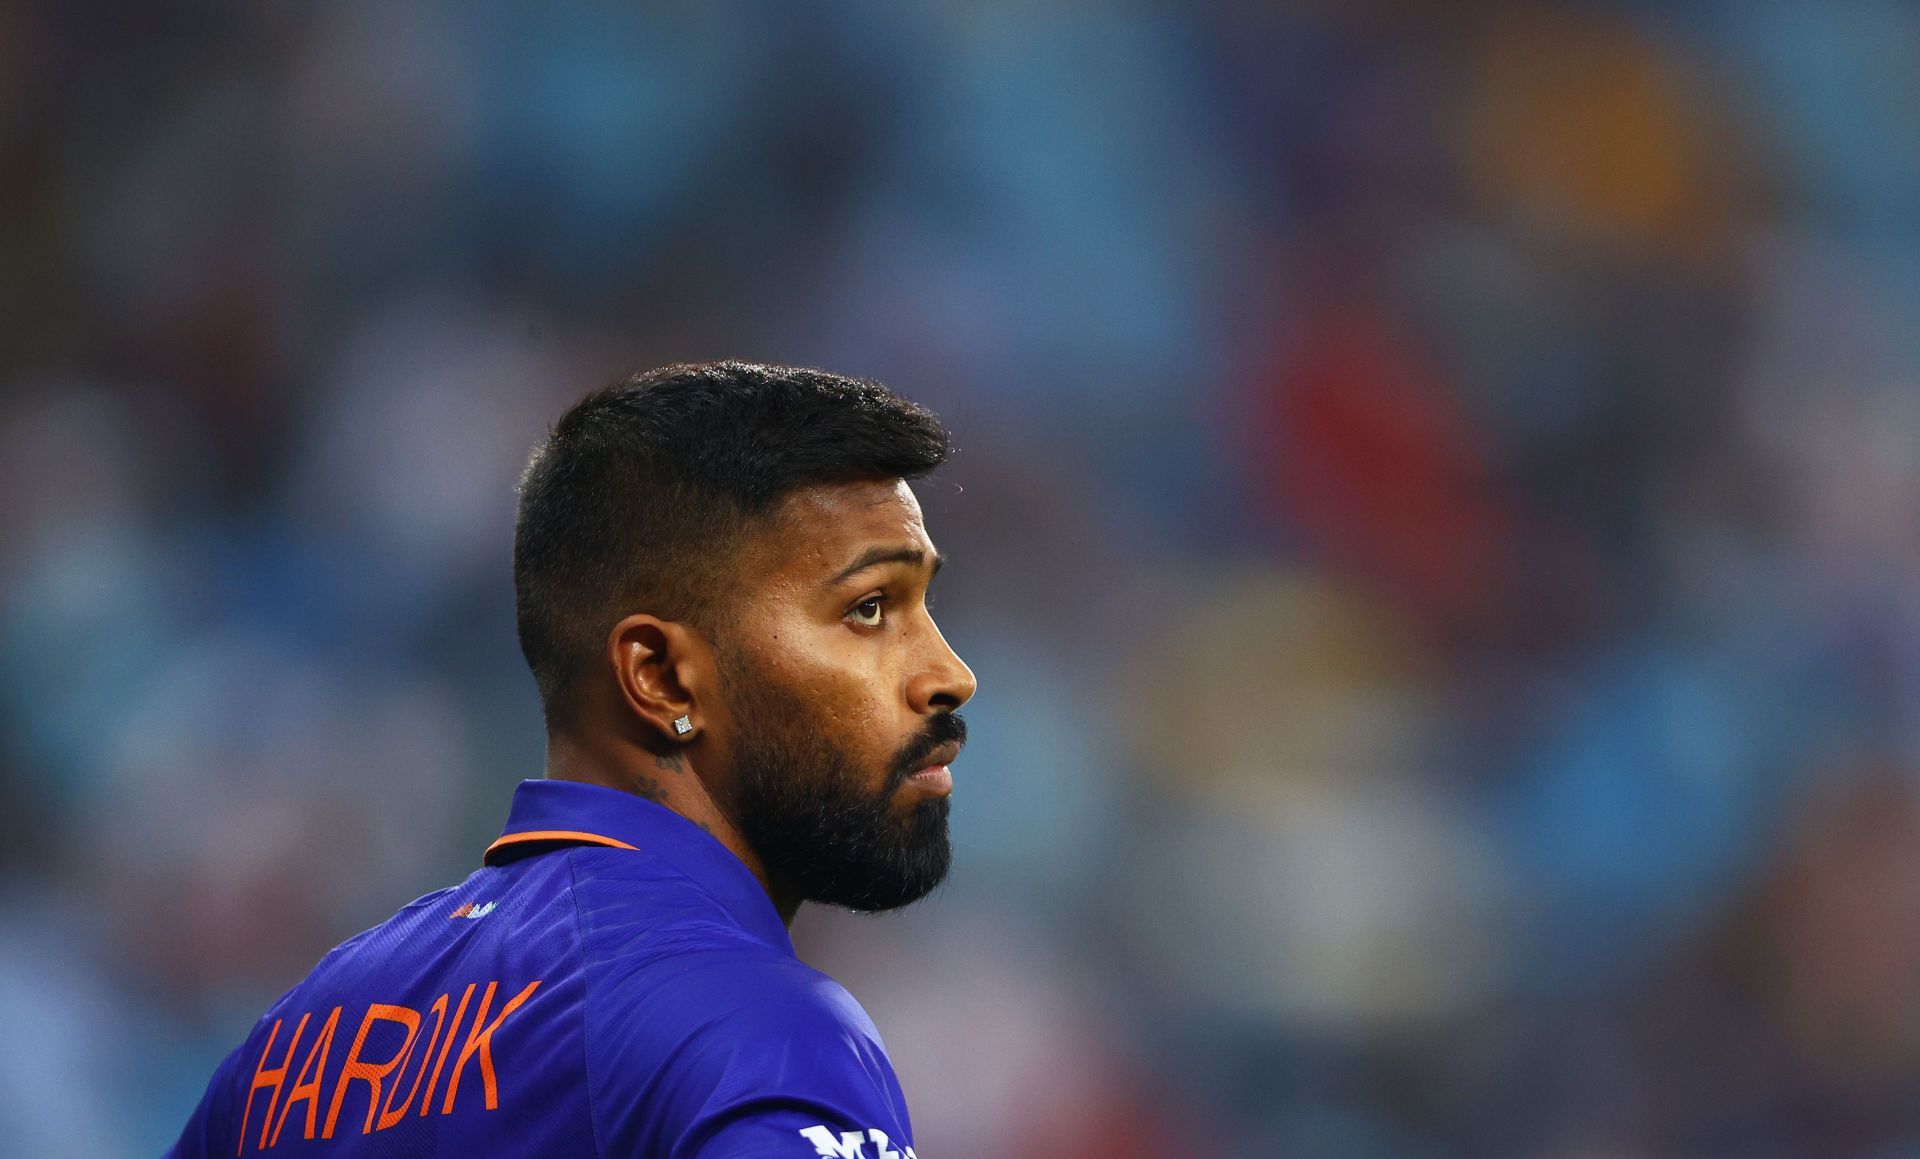 Hardik Pandya did not bowl in some important matches due to his injury.